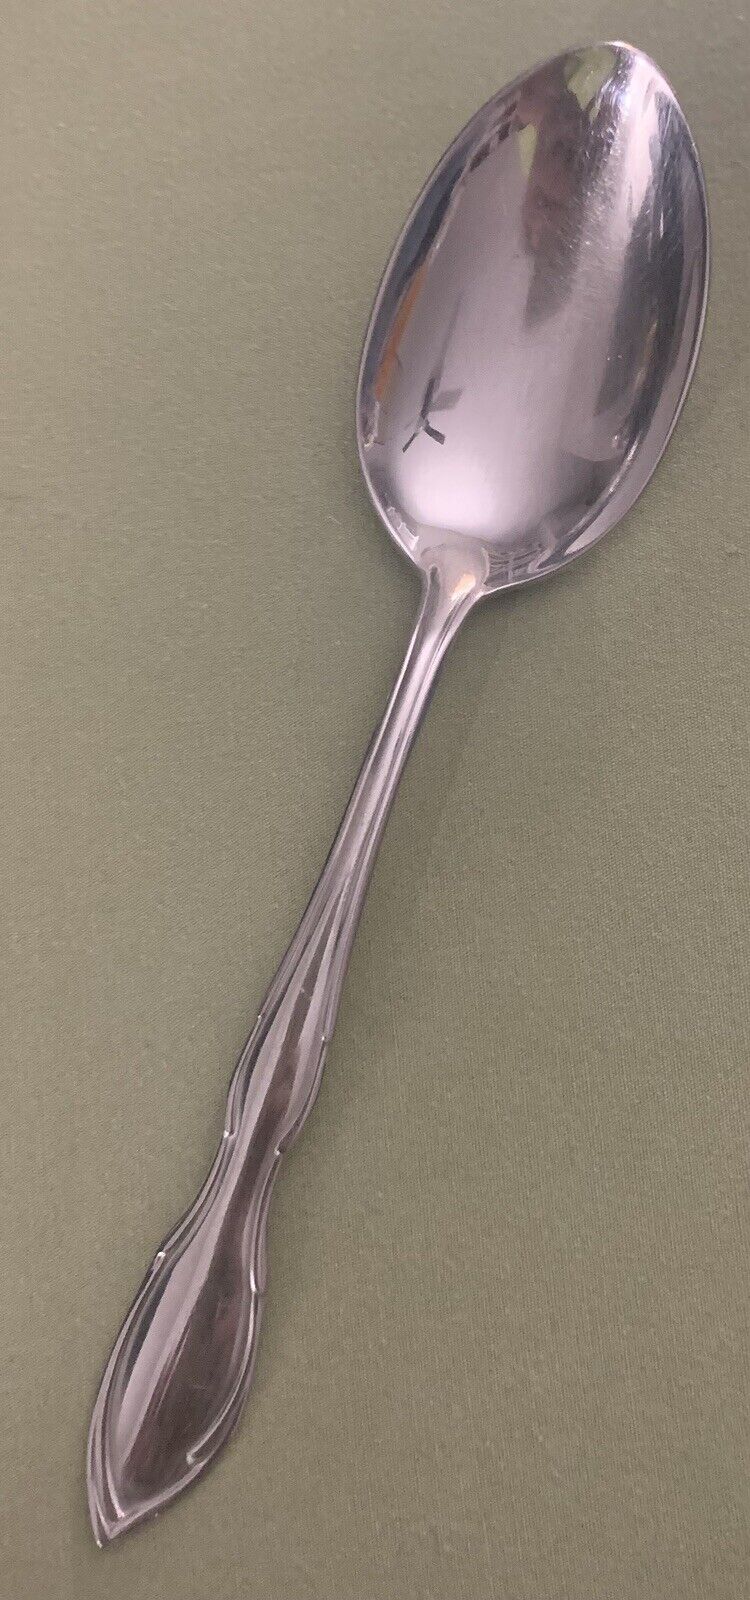 Vintage CHANSON by Gorham Stegor SOUP SPOON Stainless 6-5/8” USA